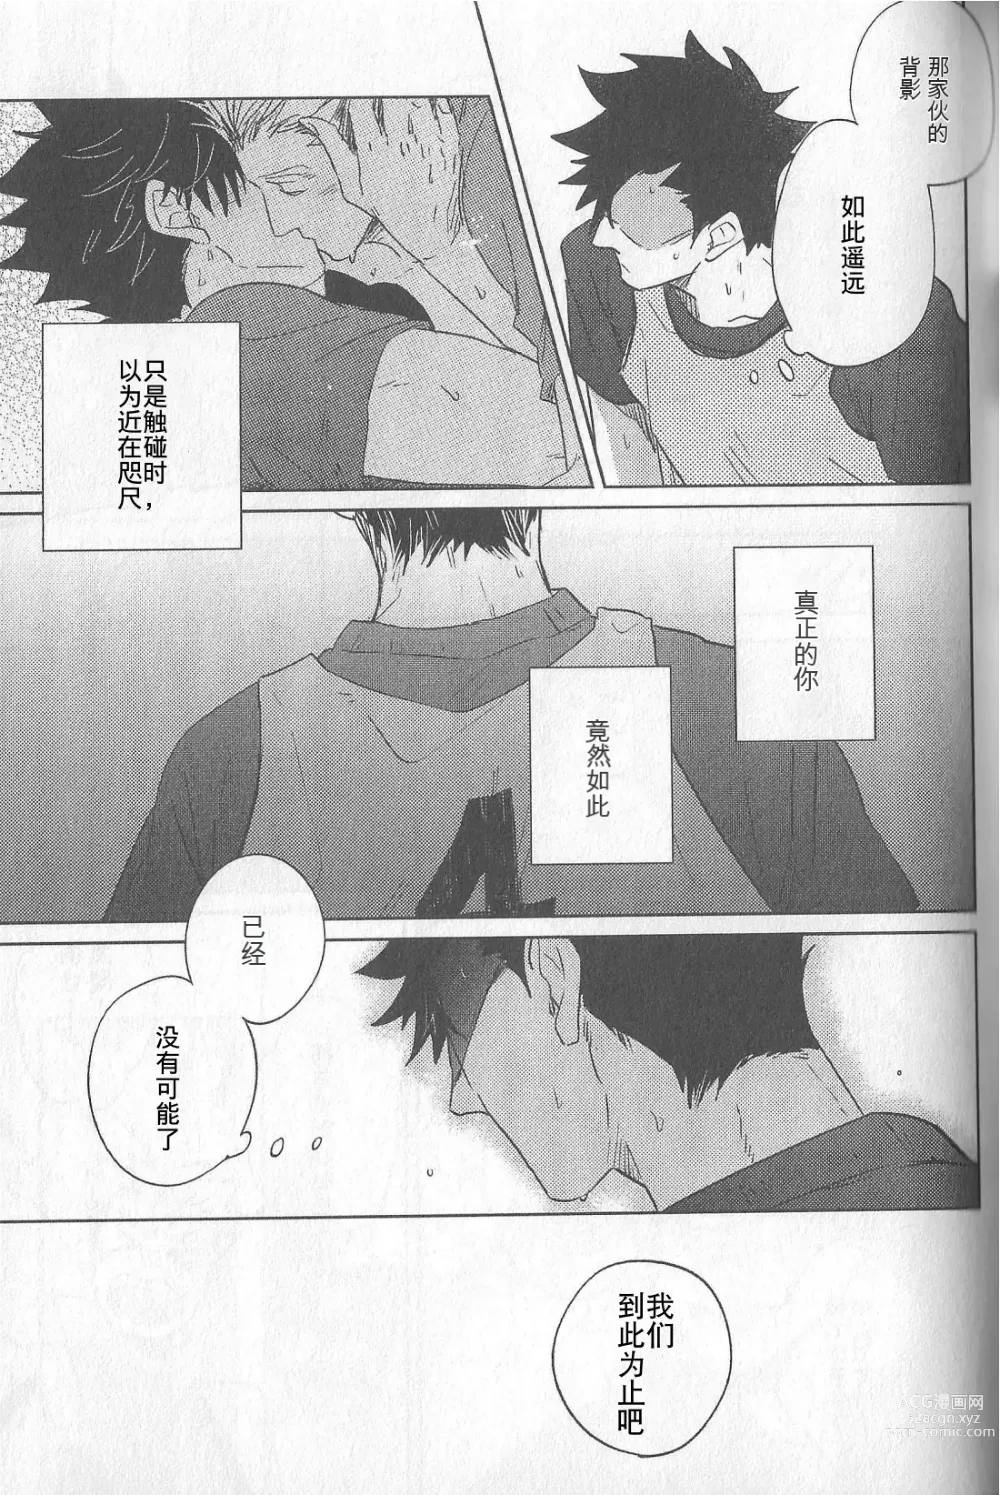 Page 4 of doujinshi 极境的野兽 后篇